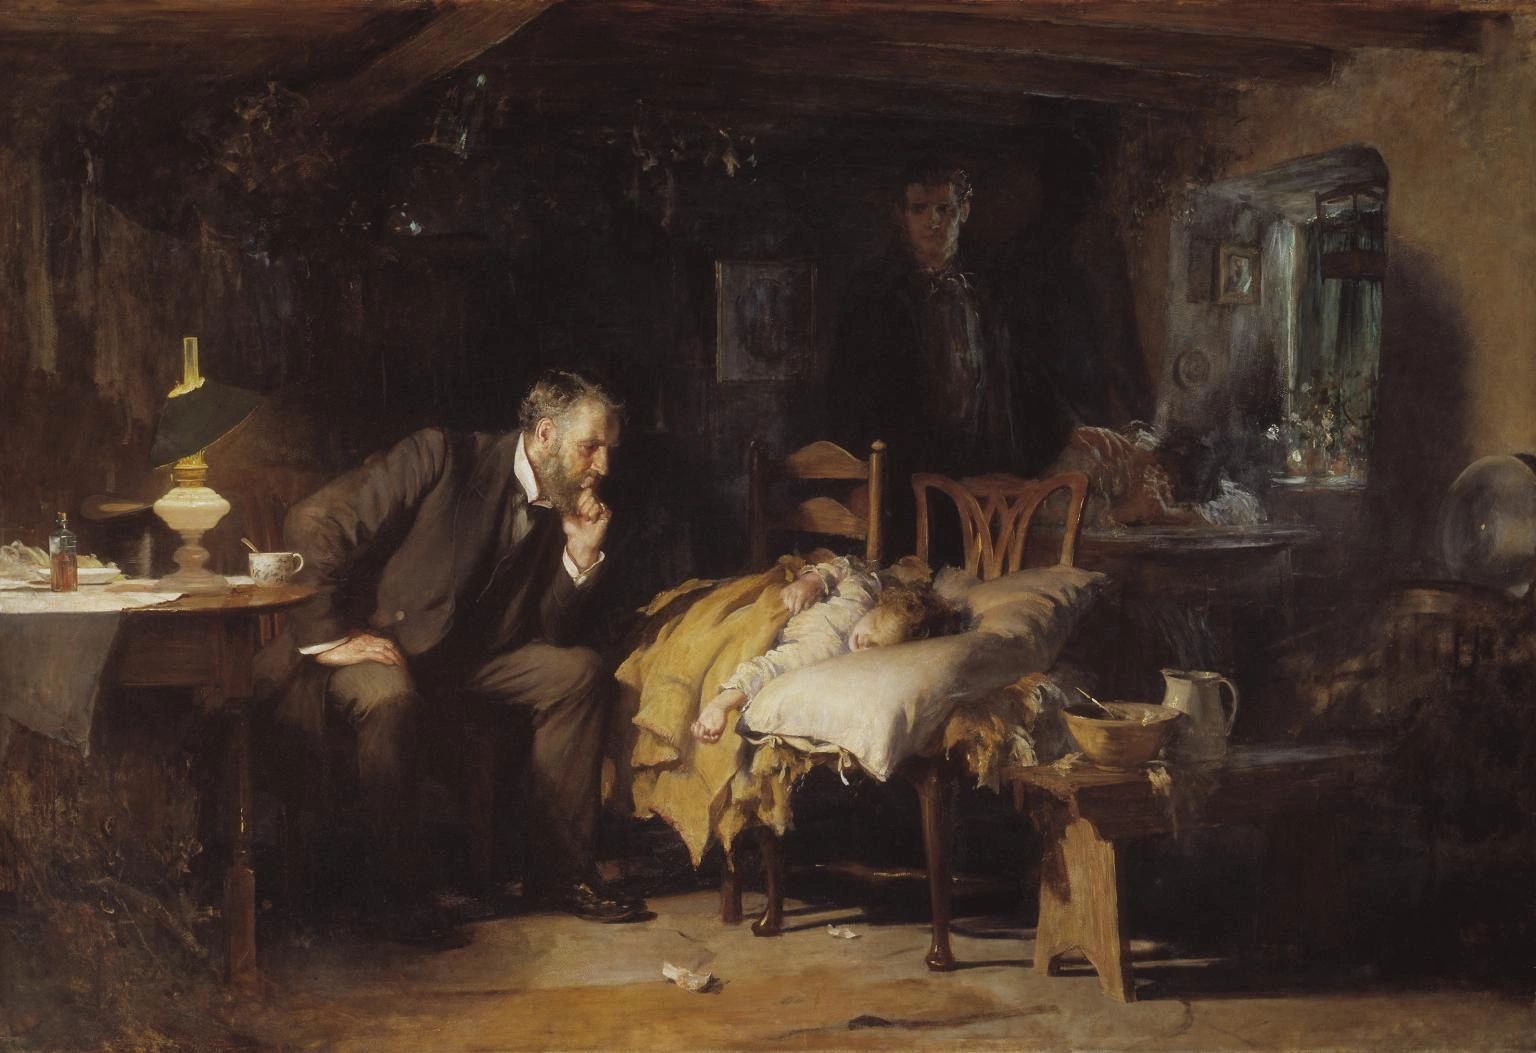 "The Doctor" painting by Luke Fildes, 1891